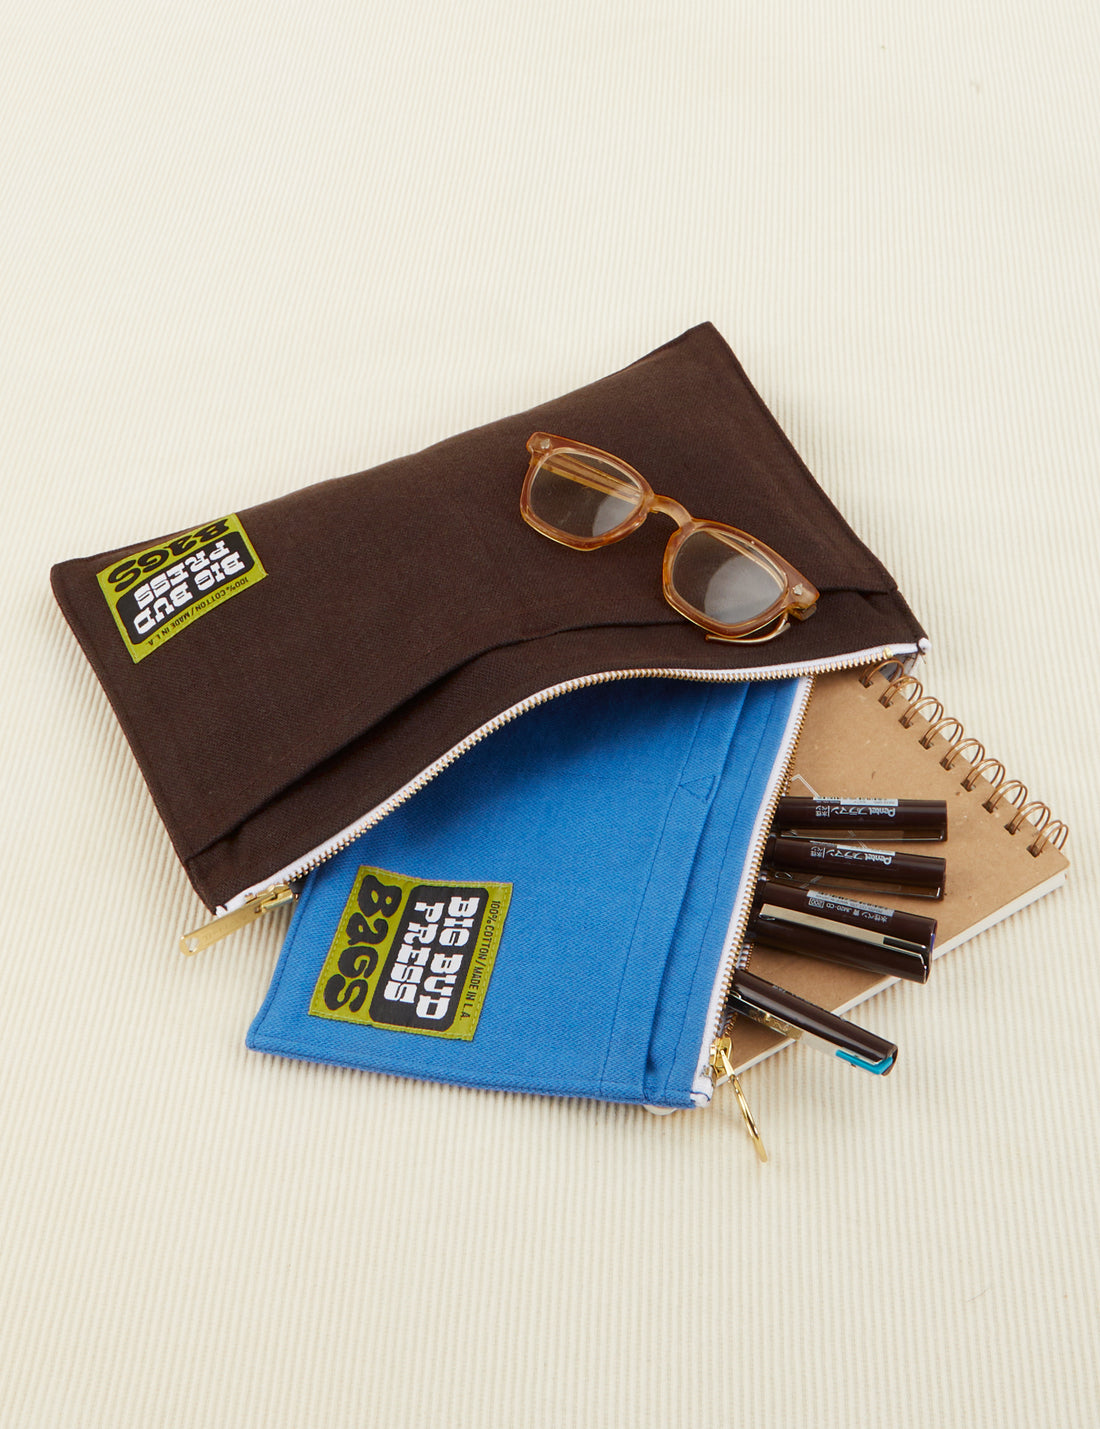 Big Pouch in Espresso Brown with pencil pouch inside along with pens and small notebook